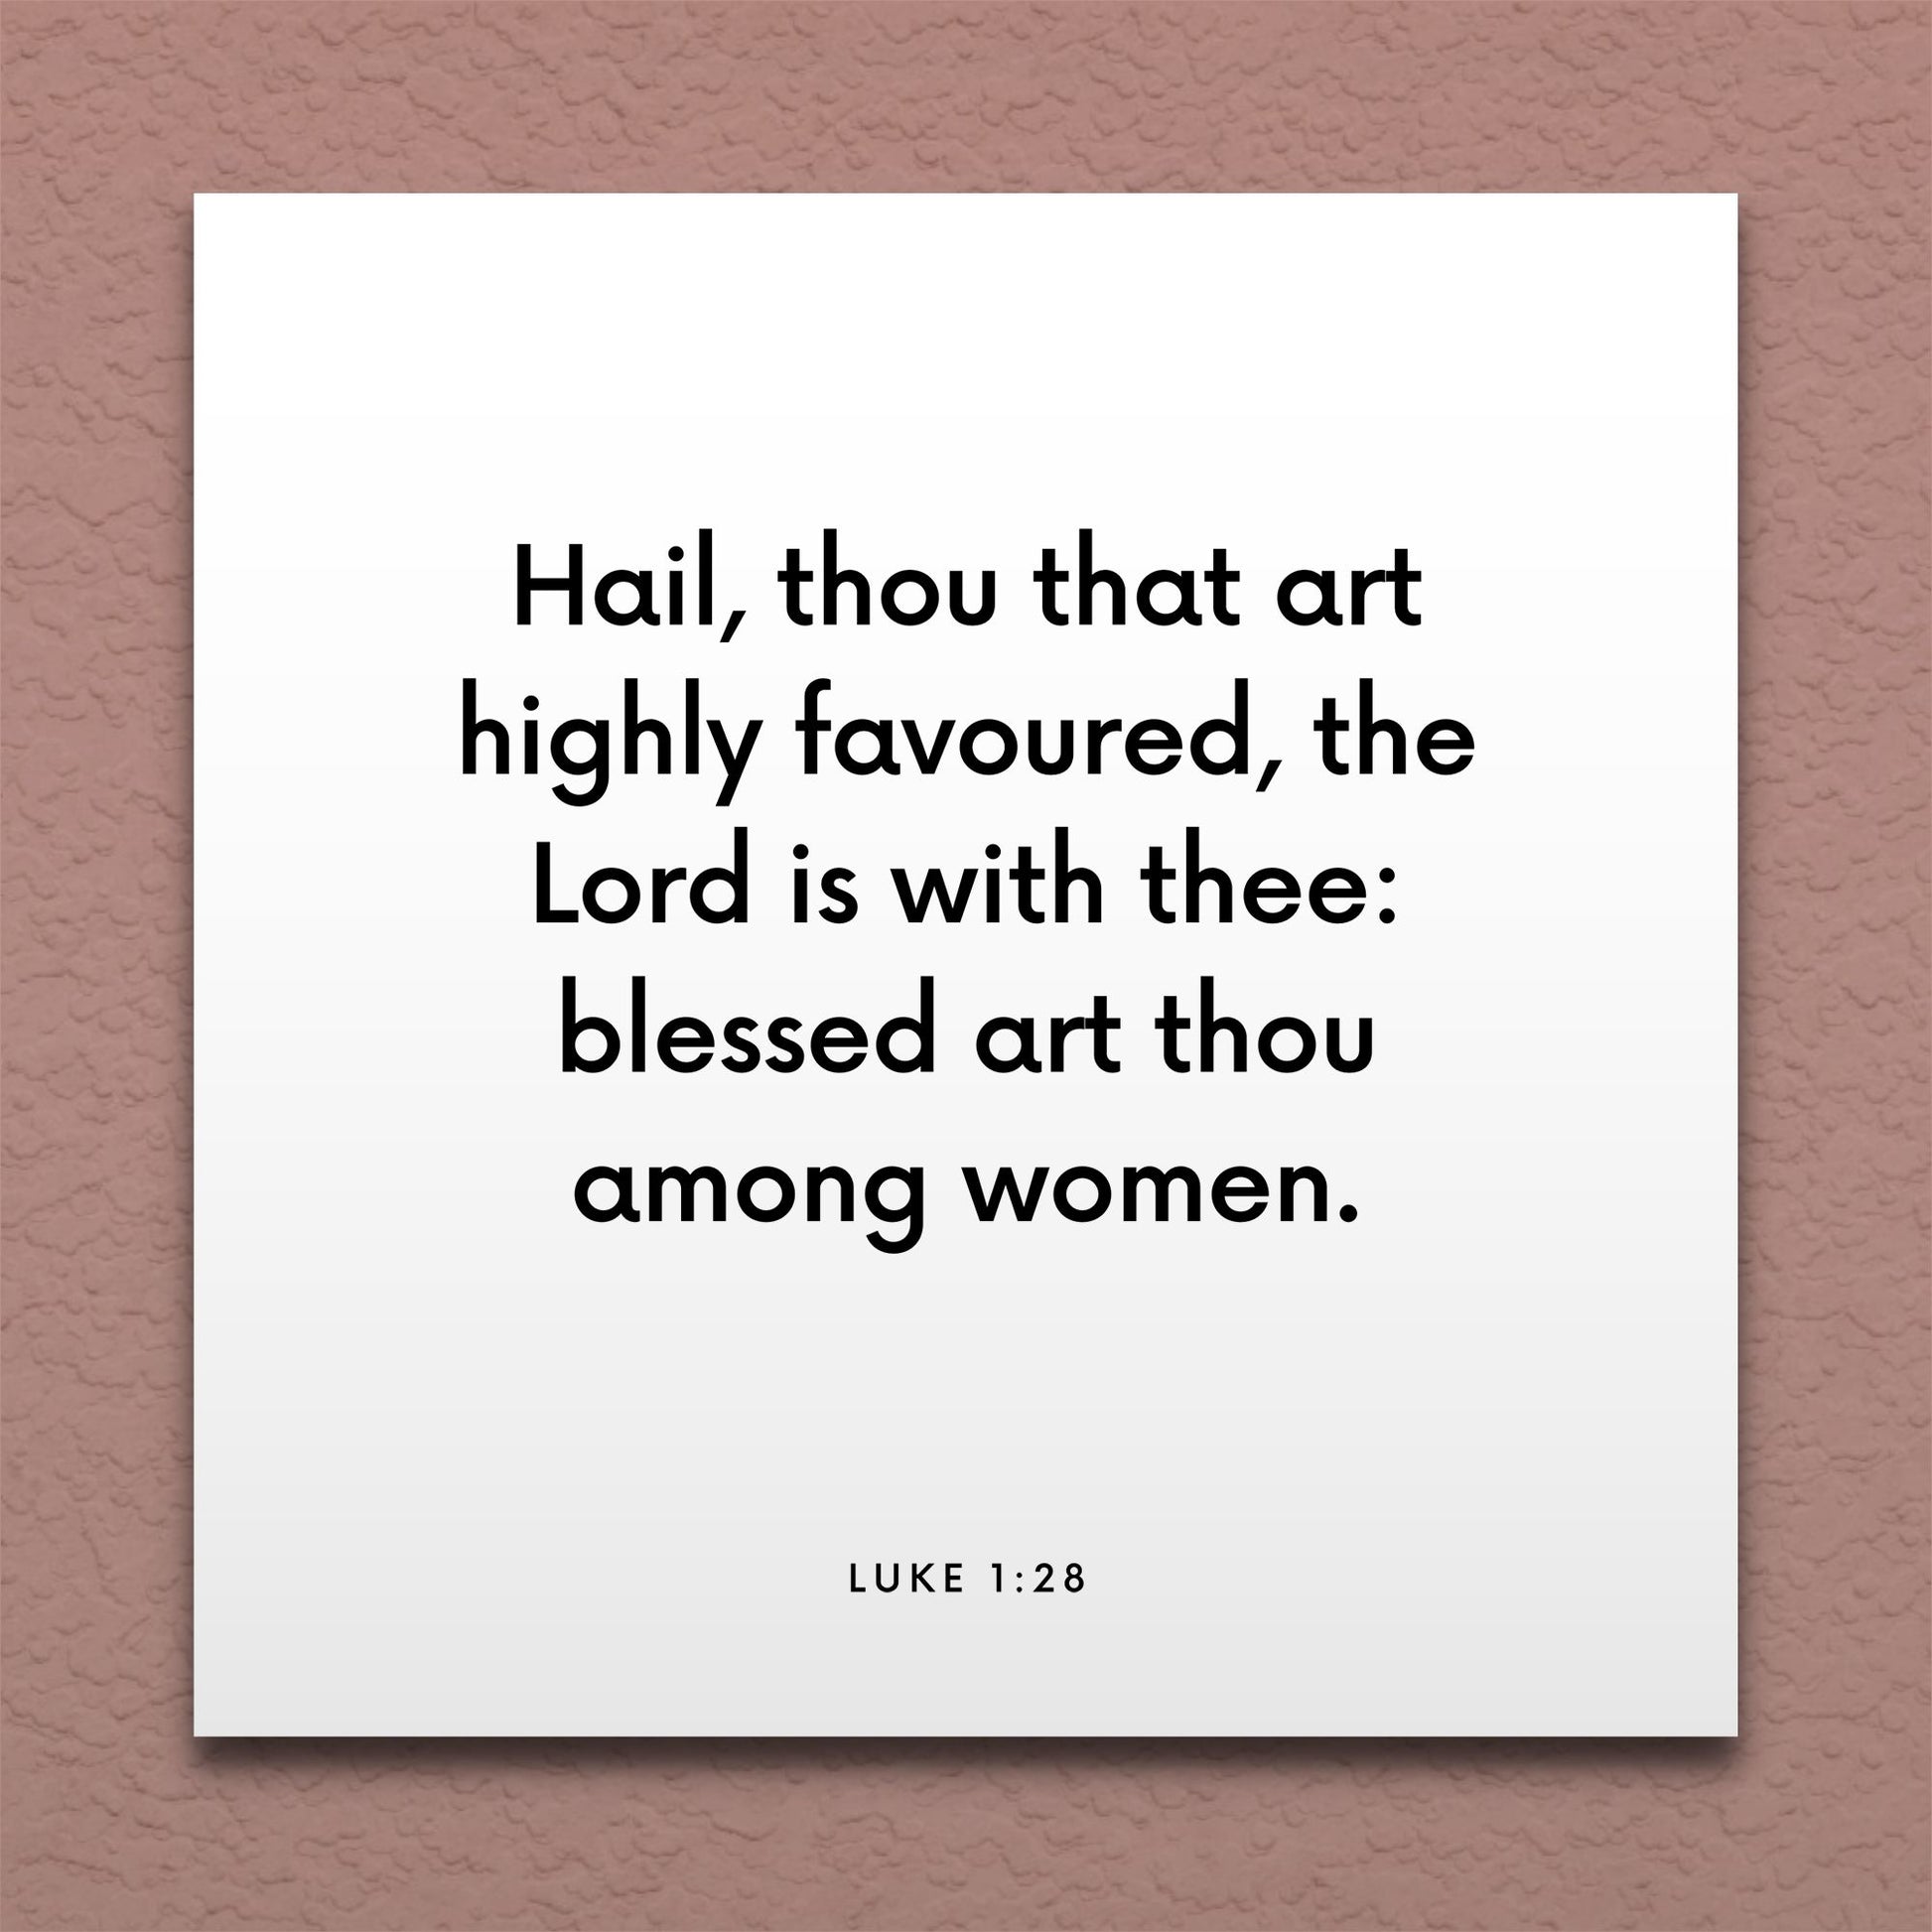 Wall-mounted scripture tile for Luke 1:28 - "Hail, thou that art highly favoured"